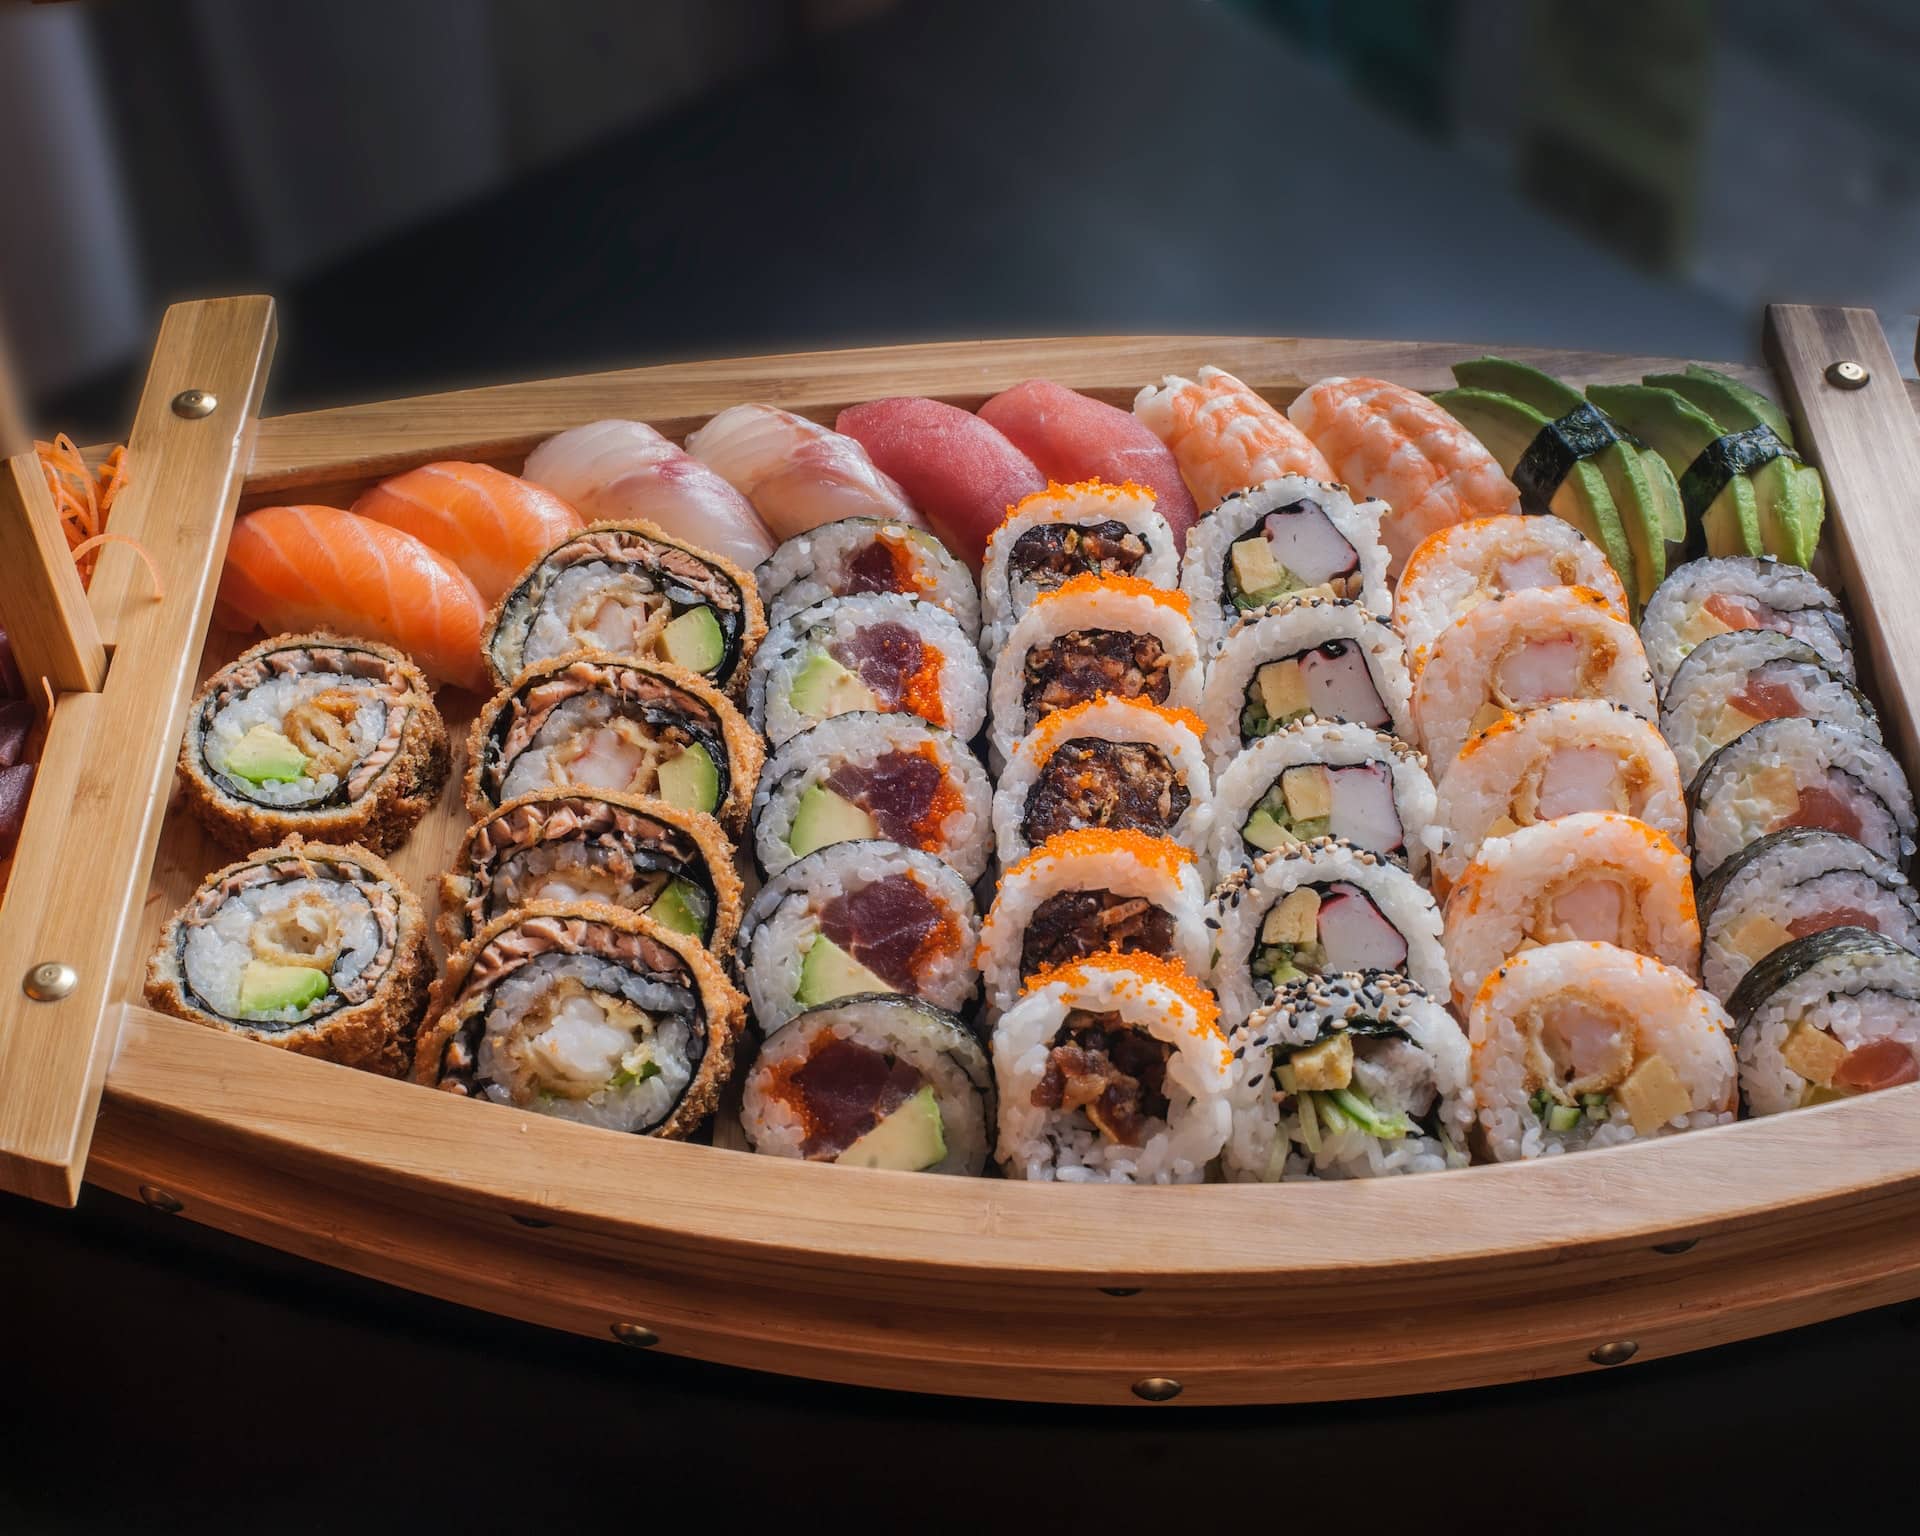 SUSHI’s price could suffer a blow in the coming days if these factors go unchecked